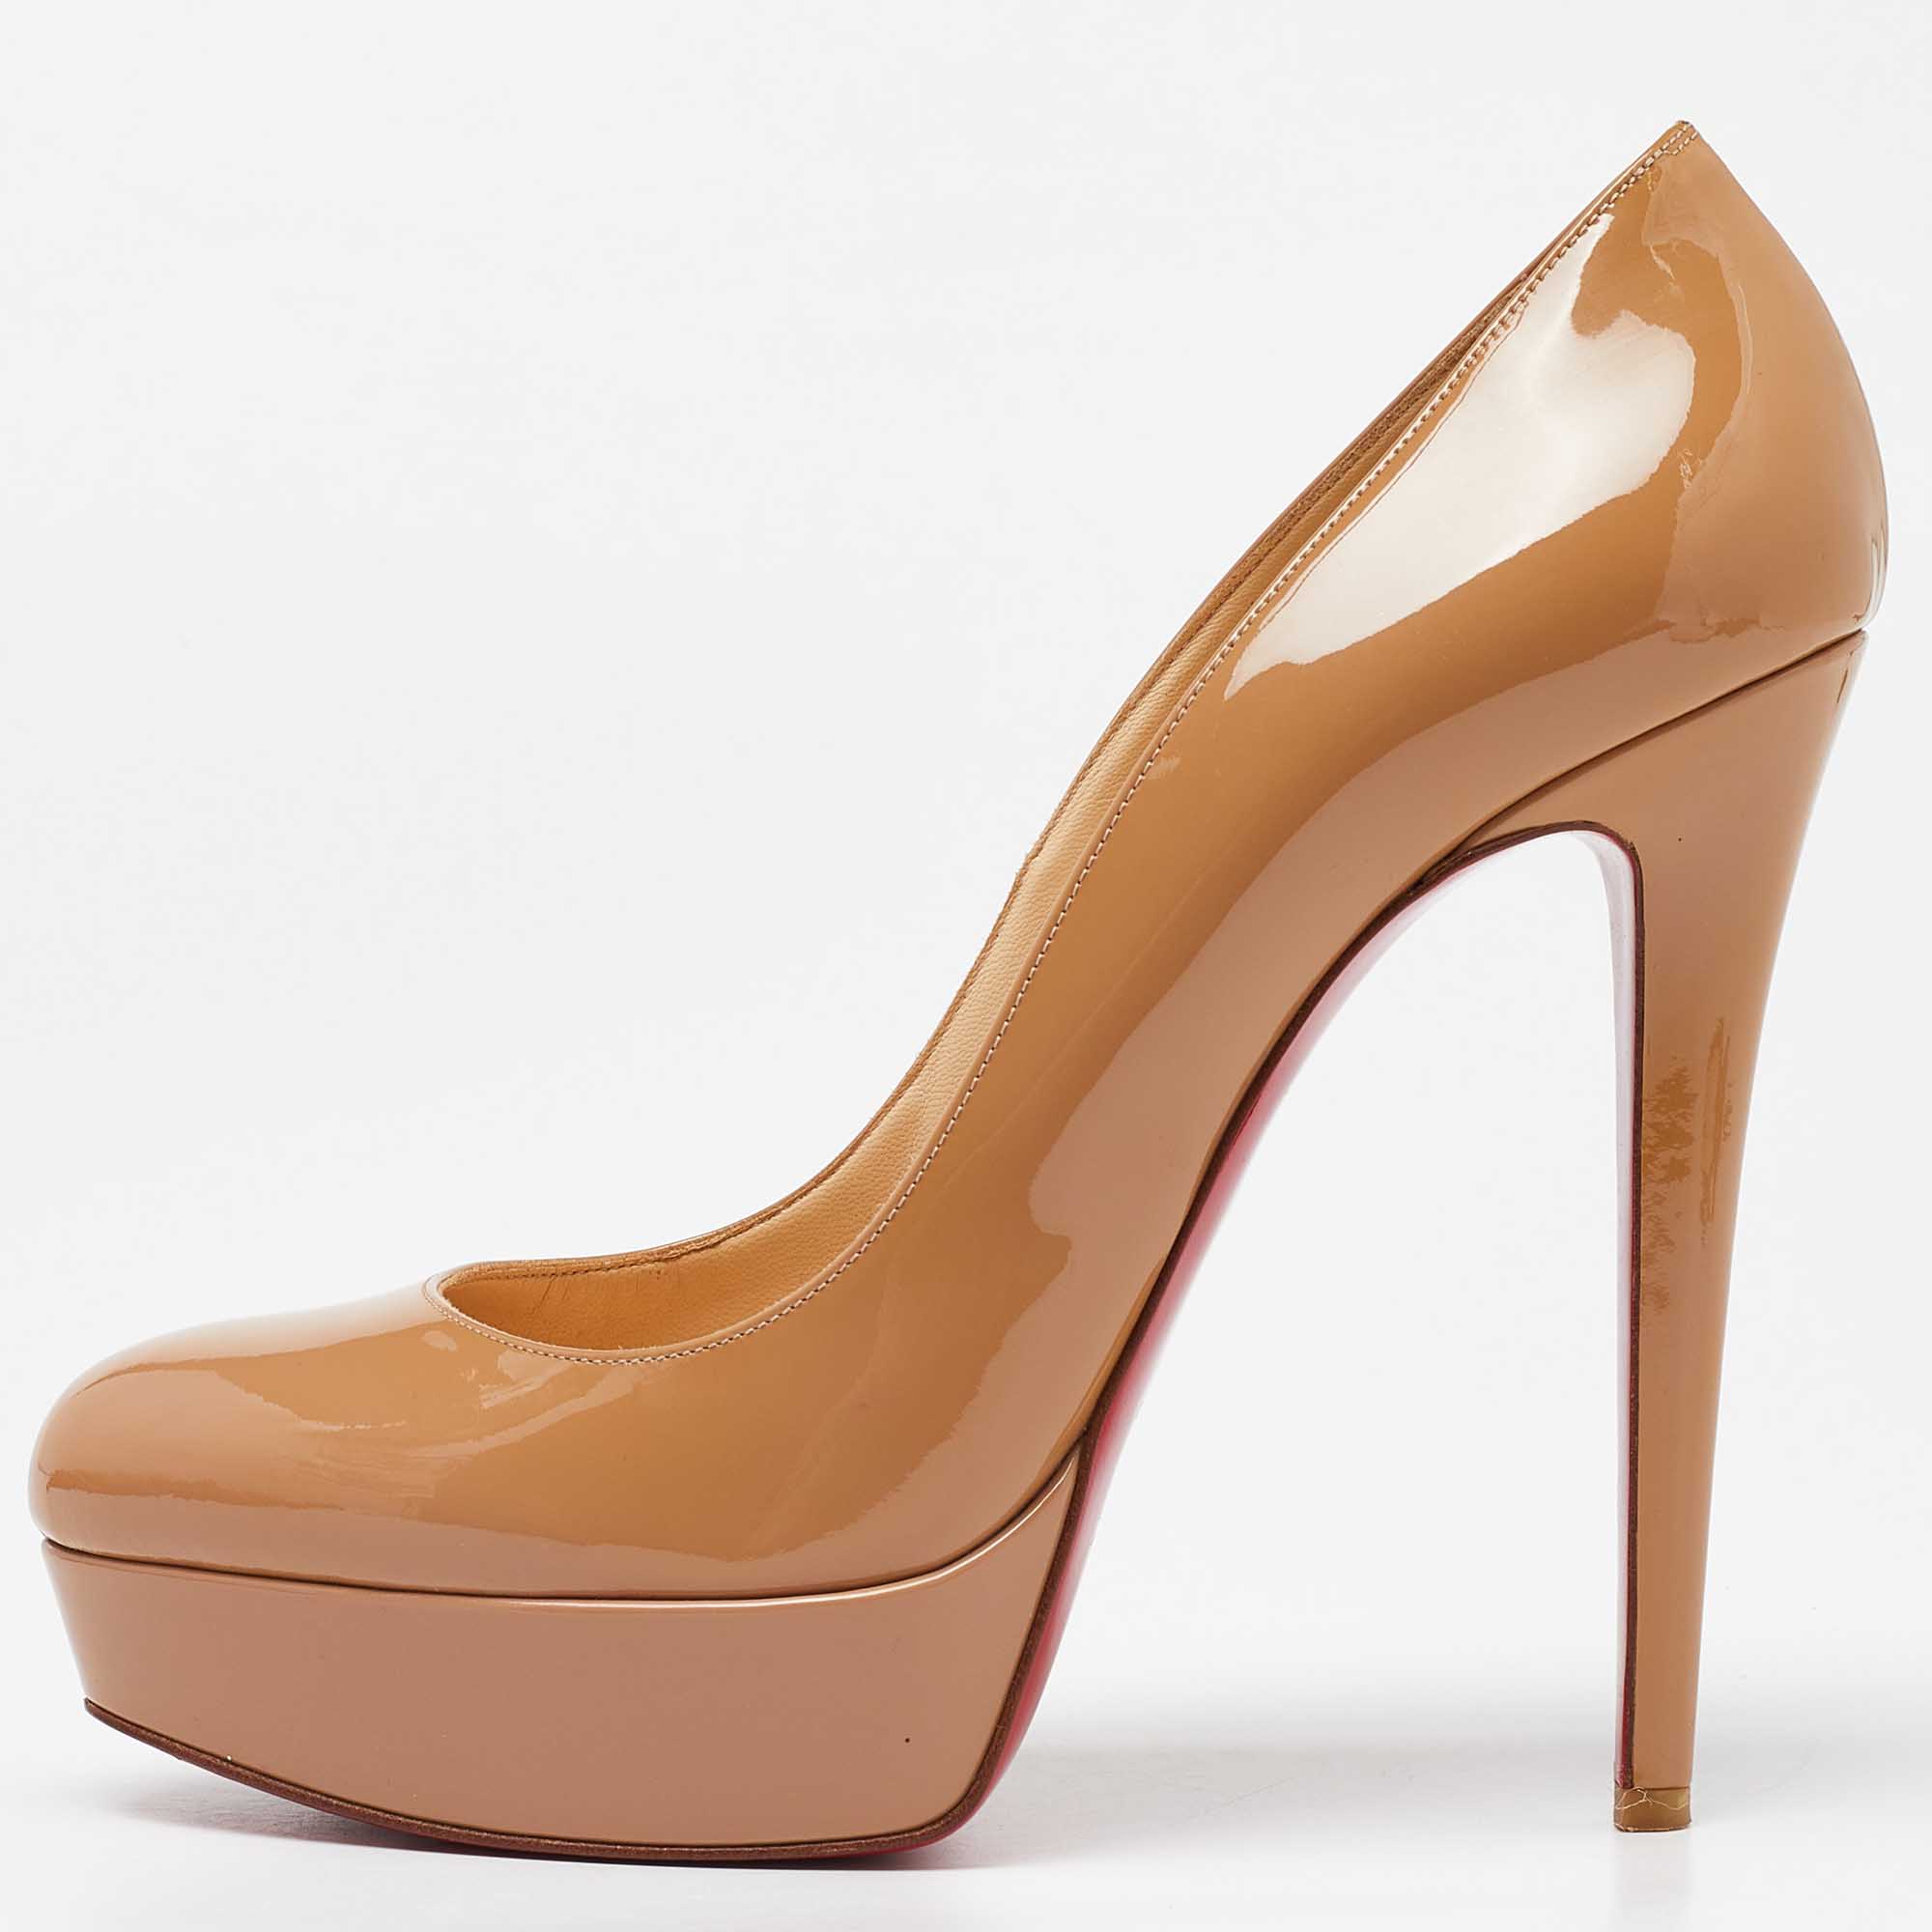 Christian louboutin beige patent leather bianca pumps size 40